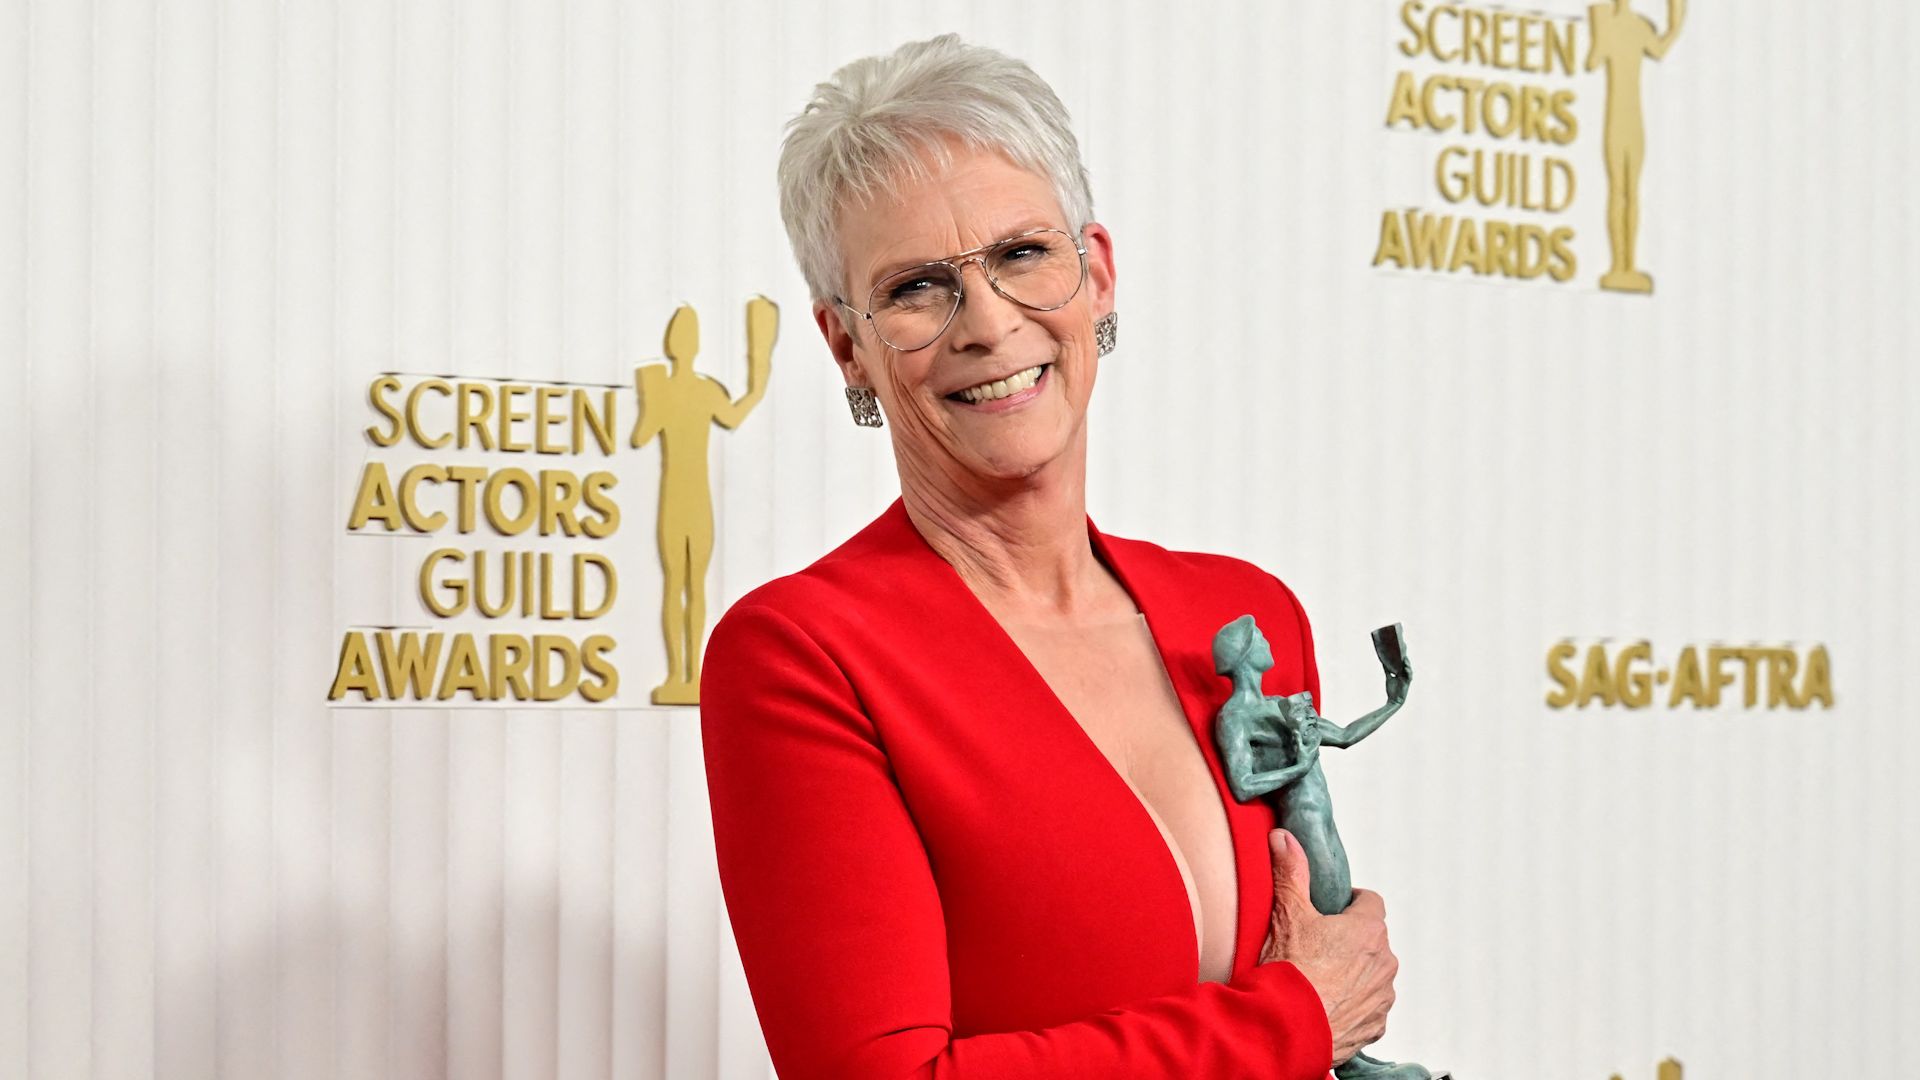 Video: SAG Awards 2023 includes Jamie Lee Curtis calling herself 'nepo baby'  in acceptance speech | CNN